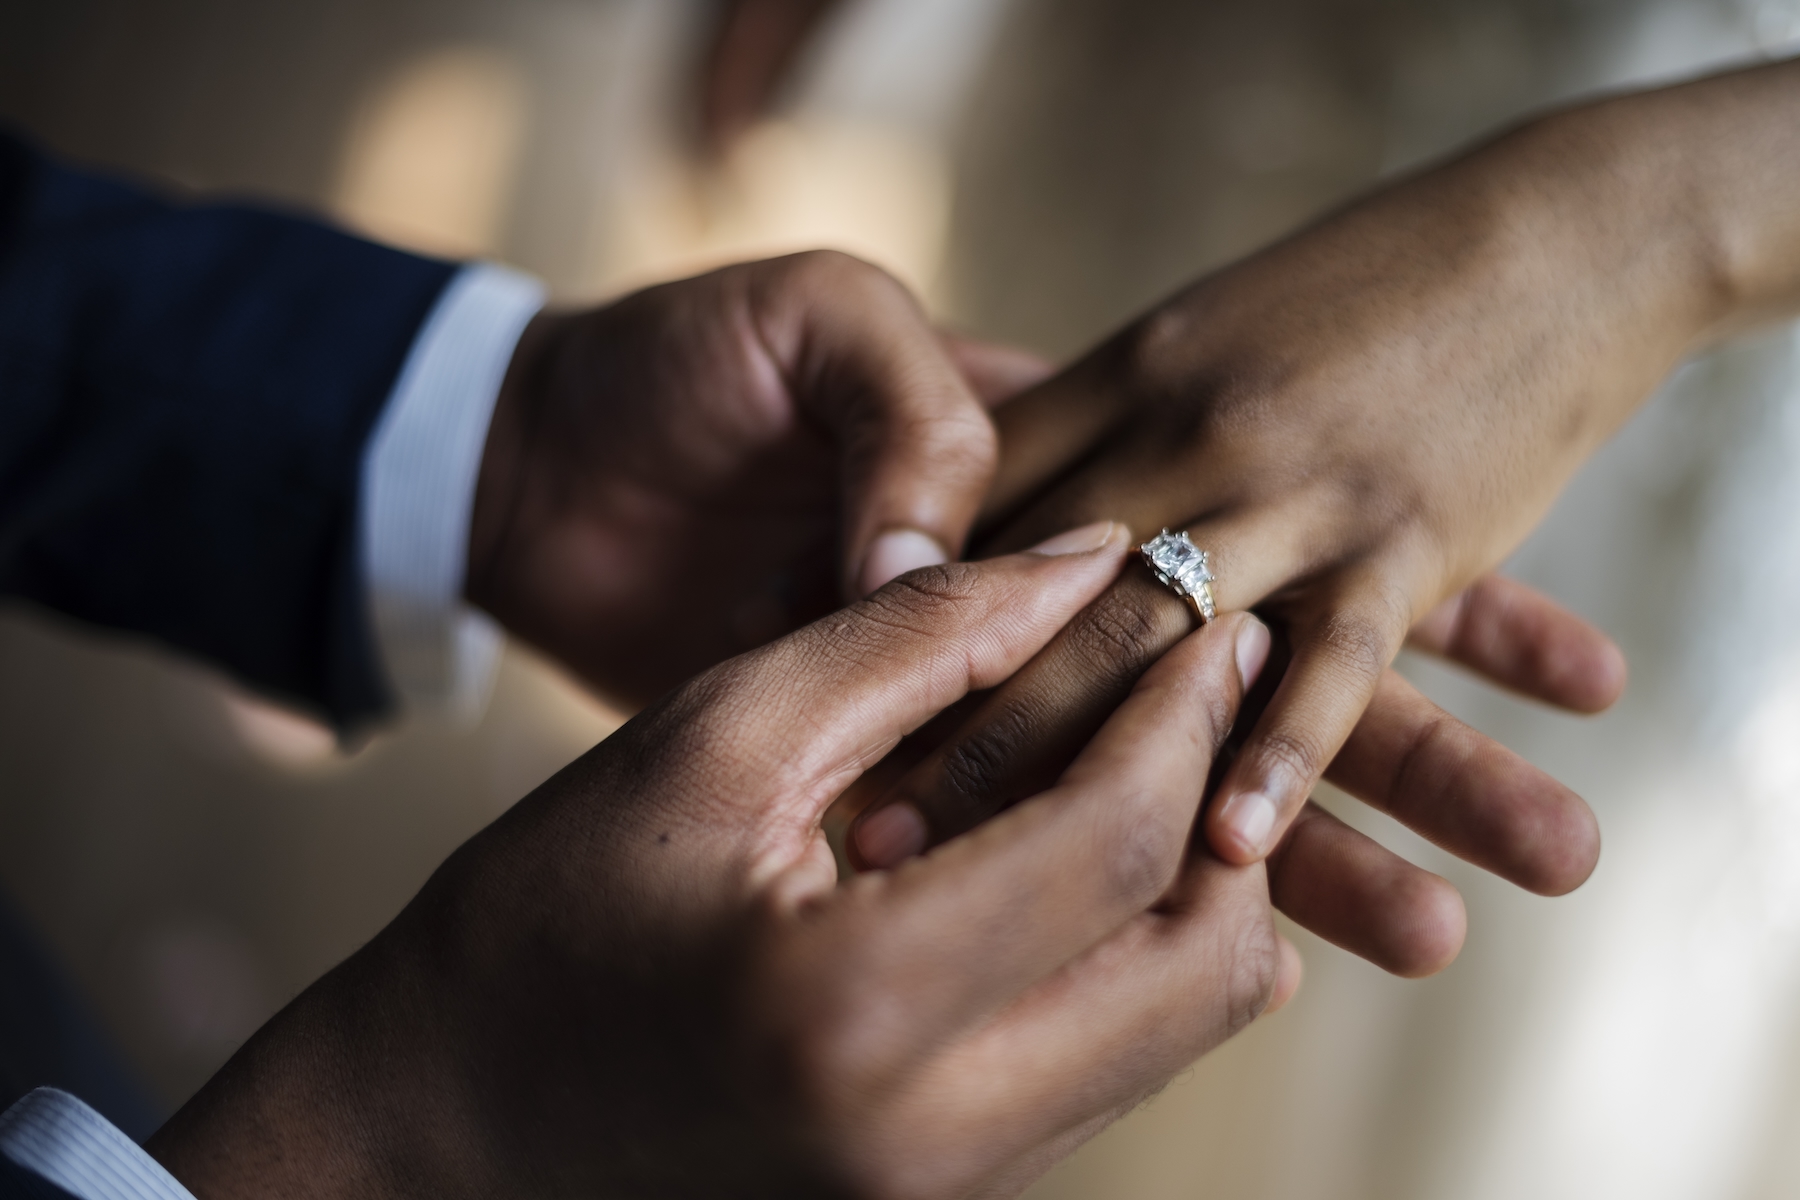 Closeup of a groom putting a wedding ring on his bride's hand during the ceremony